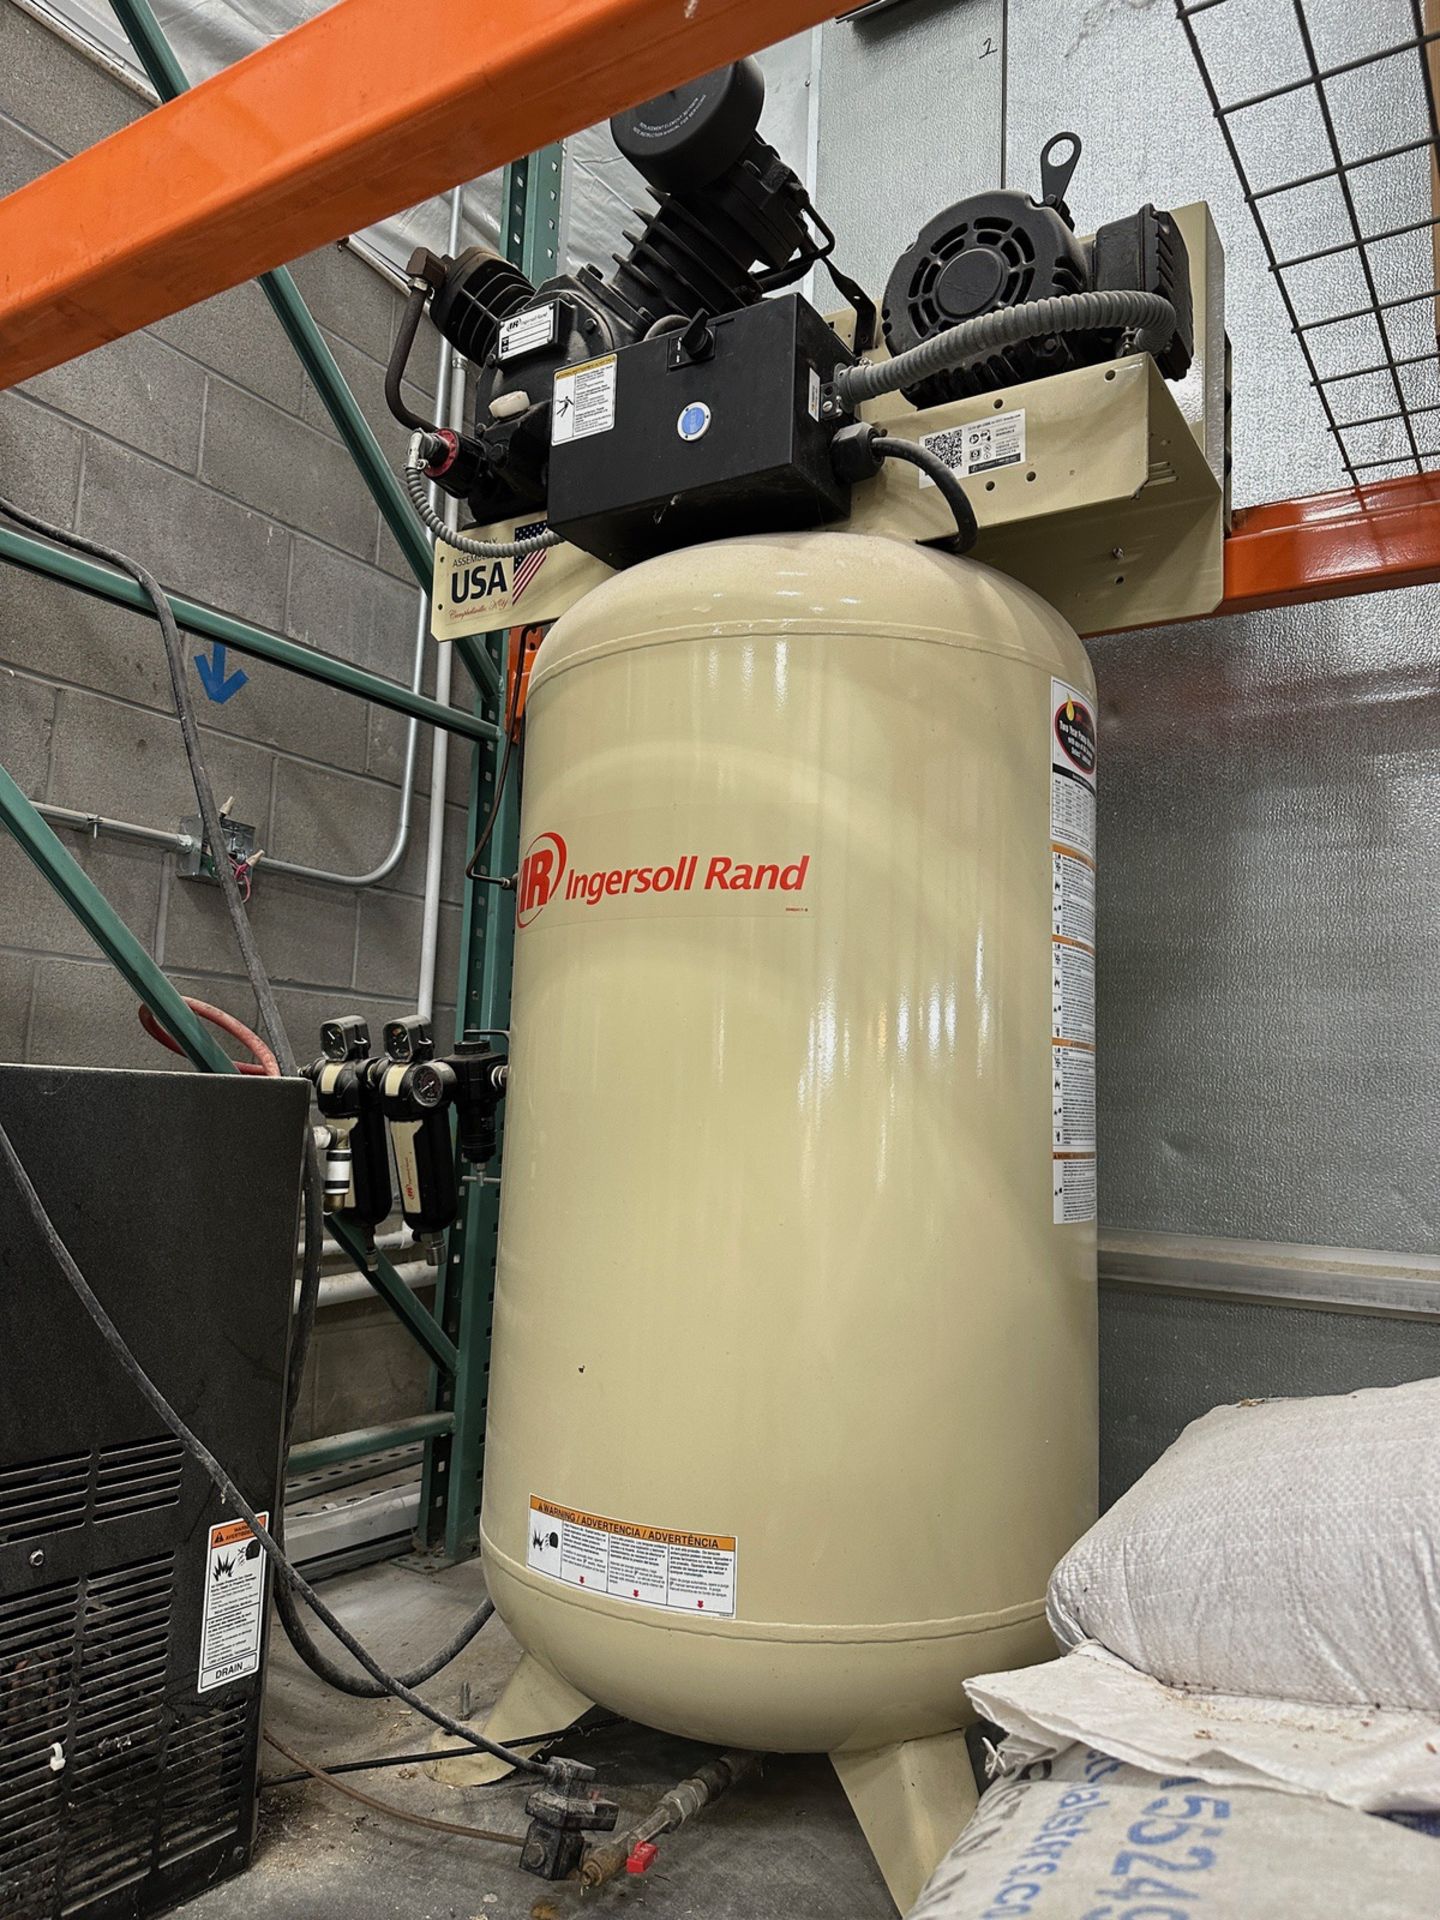 Ingersoll Rand 80 Gallon Air Compressor - Model 2475N7.5-P with Ingersoll | Rig Fee $125